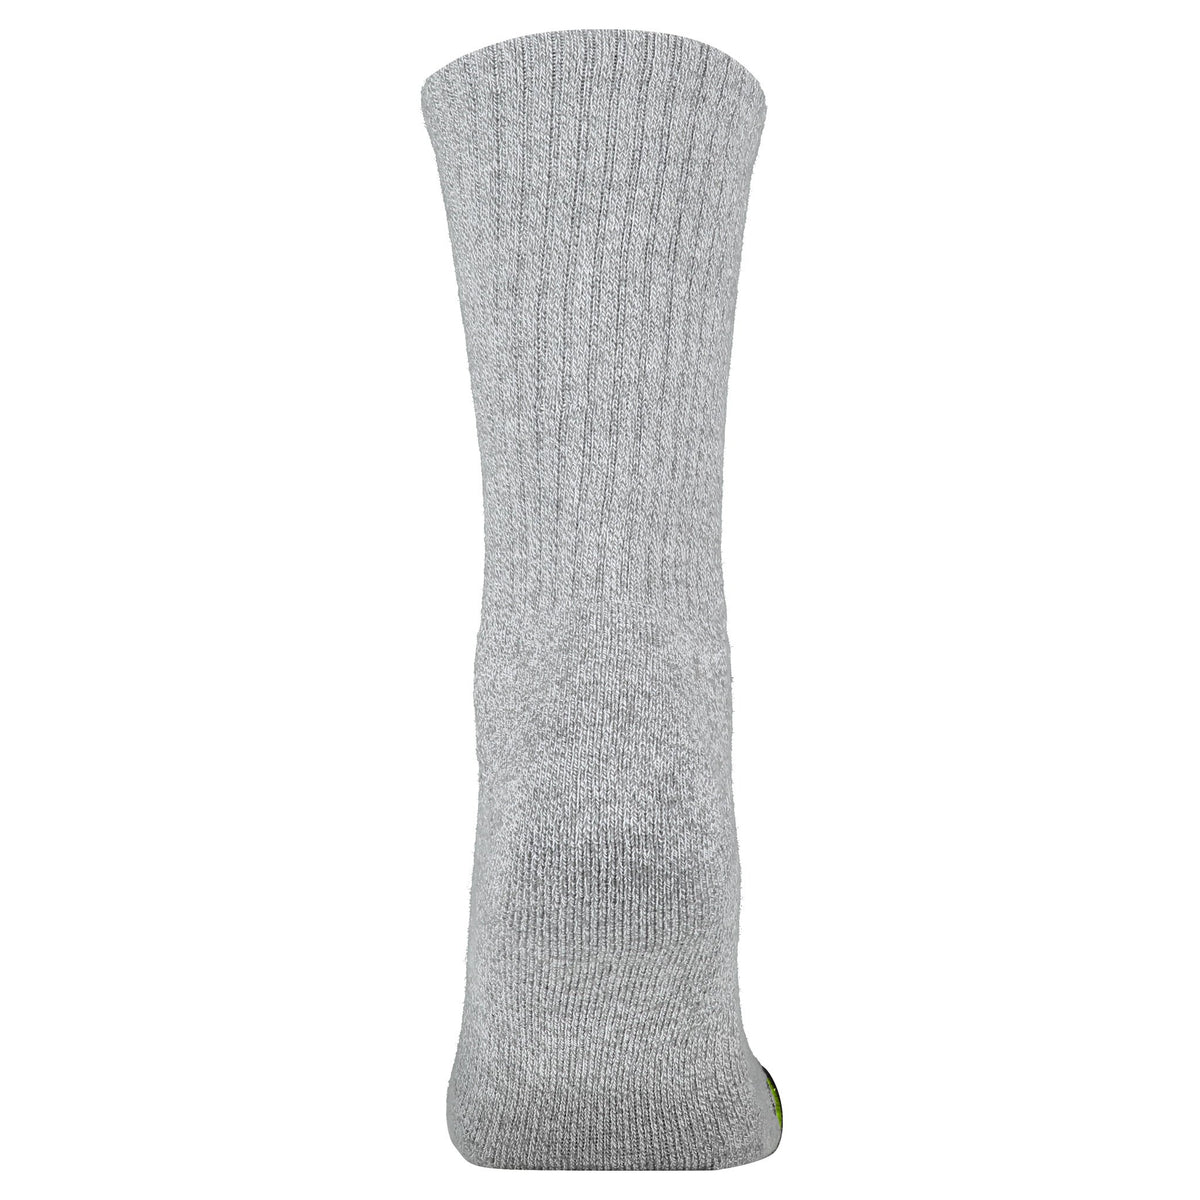 Crossfly men&#39;s Original Crew Socks in grey from the Everyday series, featuring Flat Toe Seams and 360 Hold.